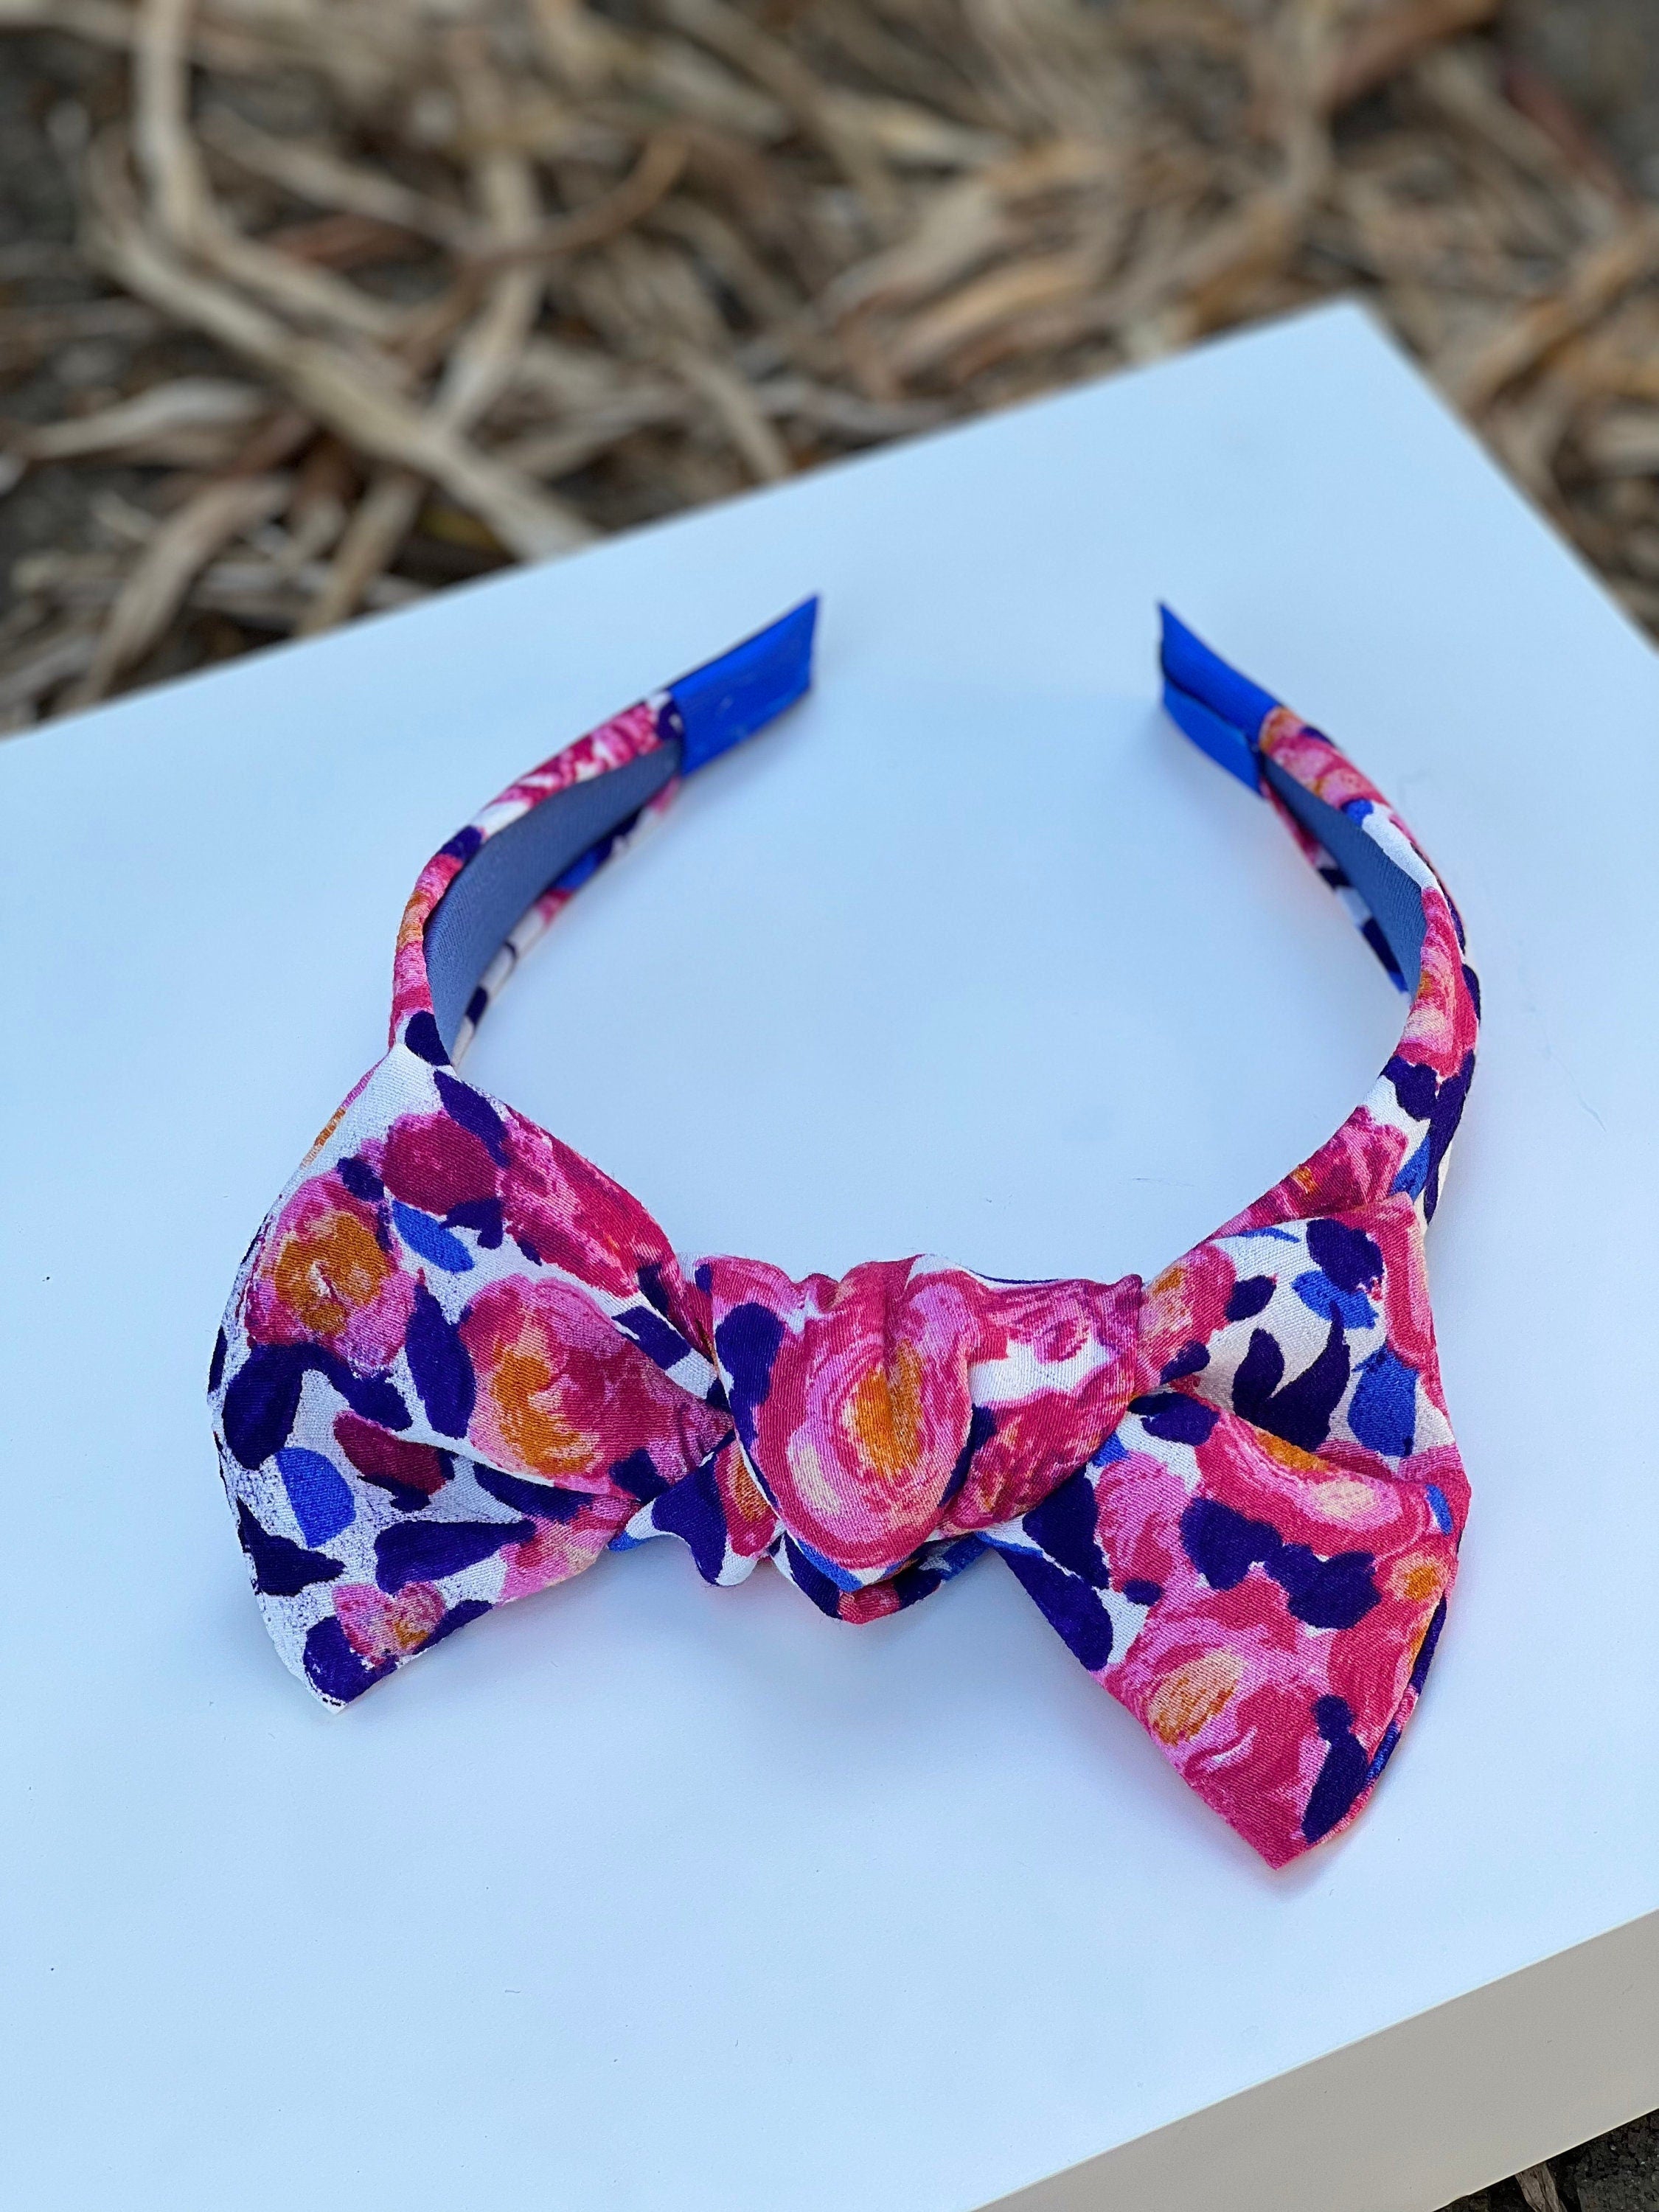 Brighten up your look with this multicolor flower patterned headband